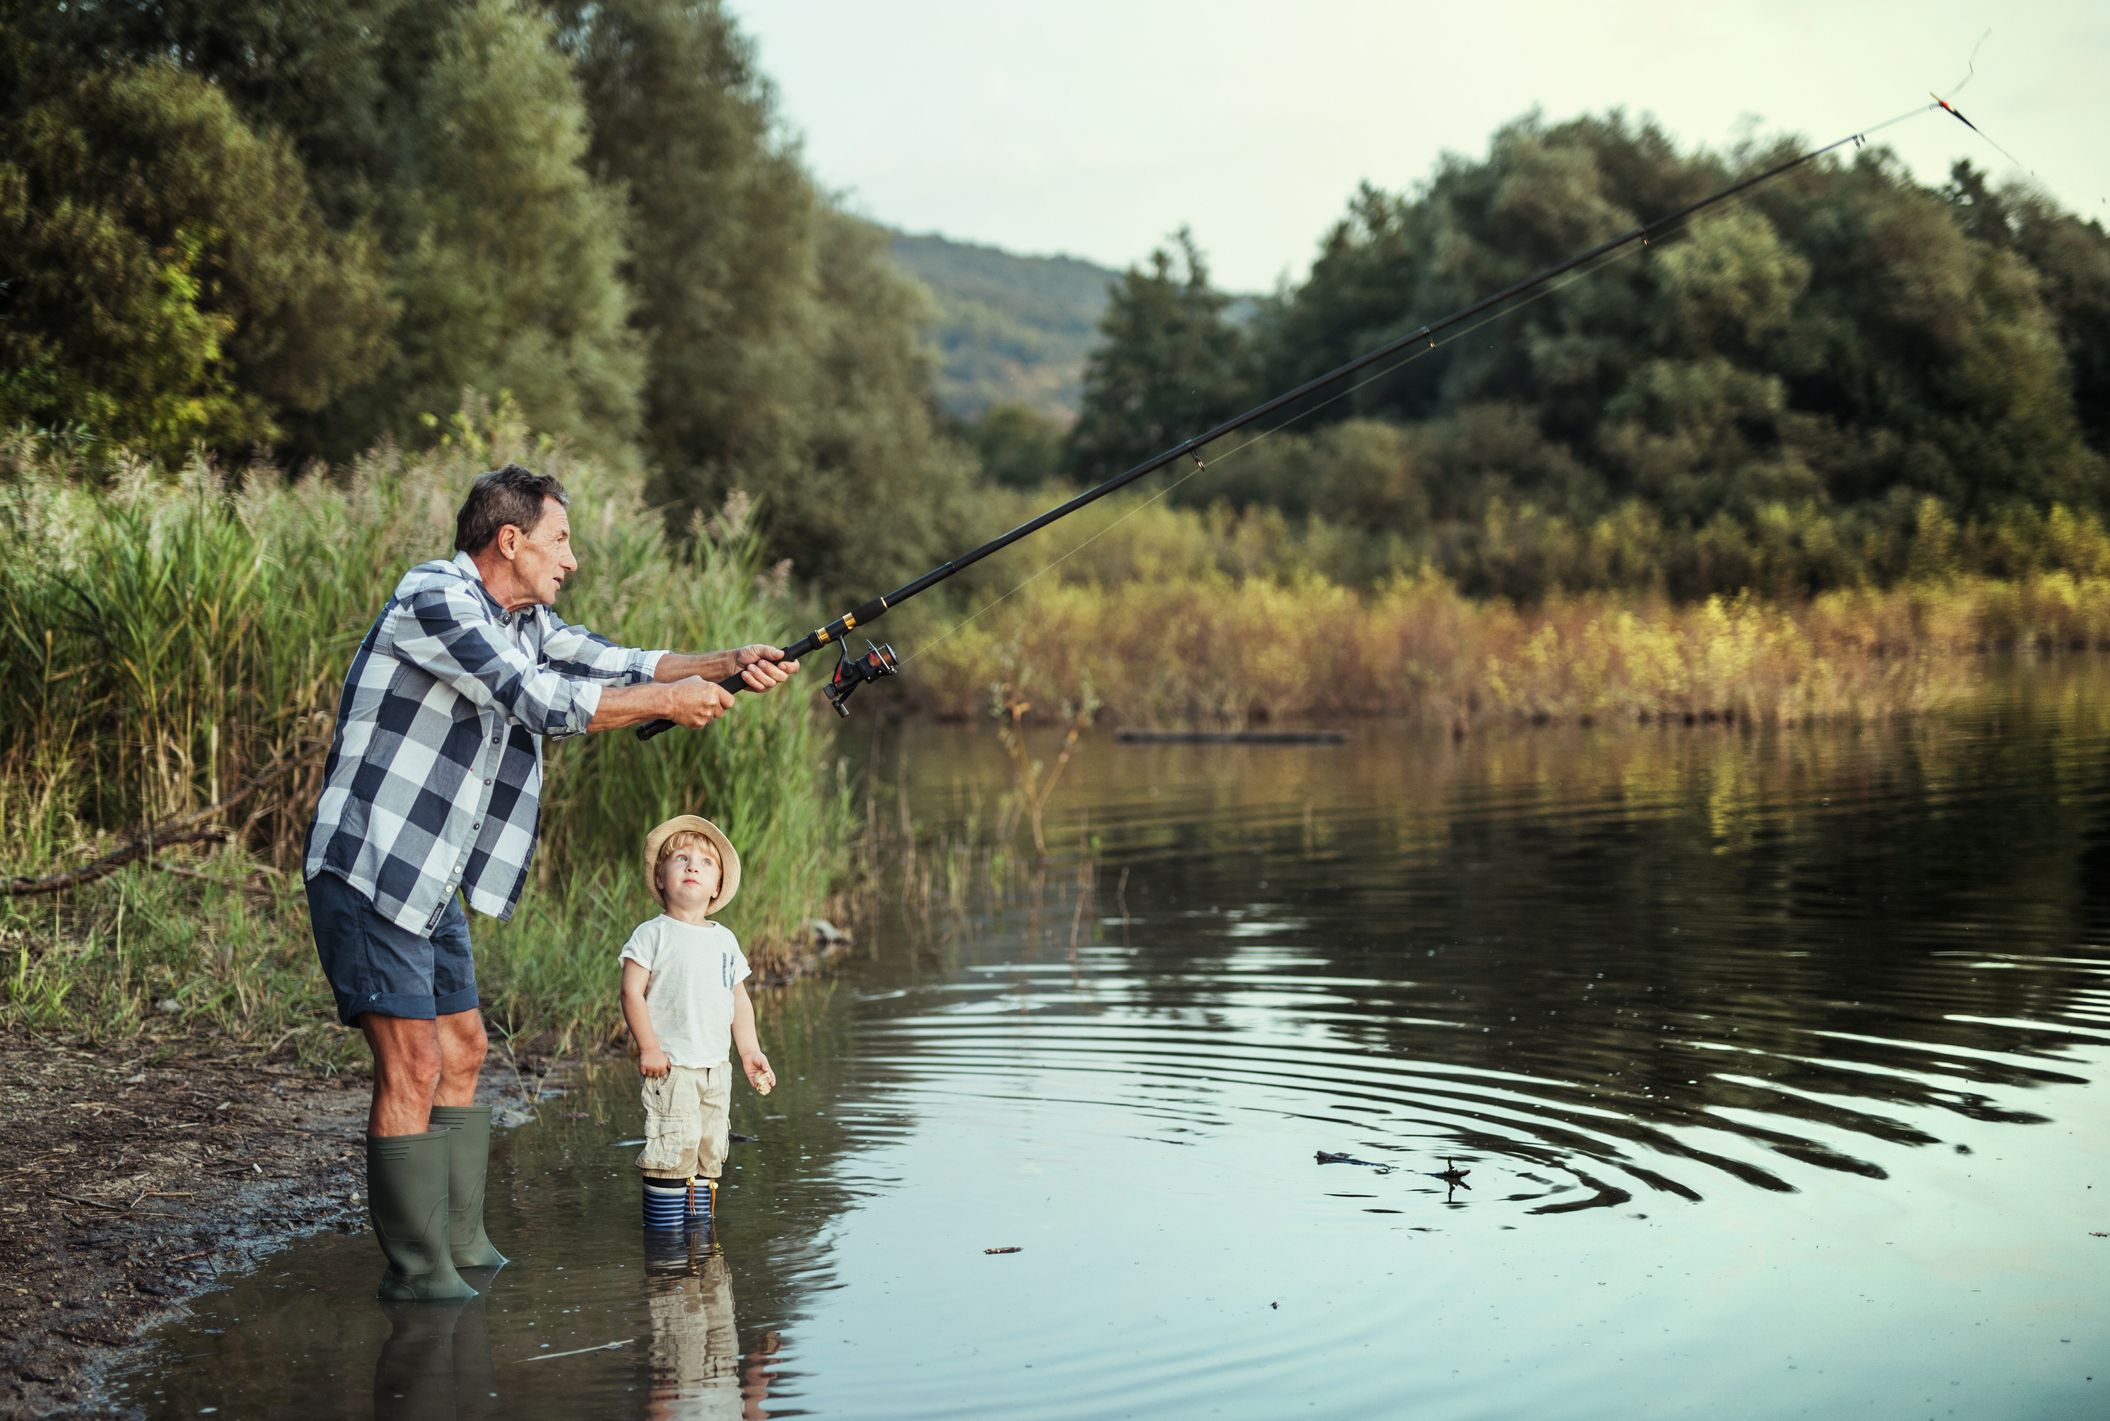 32 Fishing Gifts for Dad - Presents for Anglers